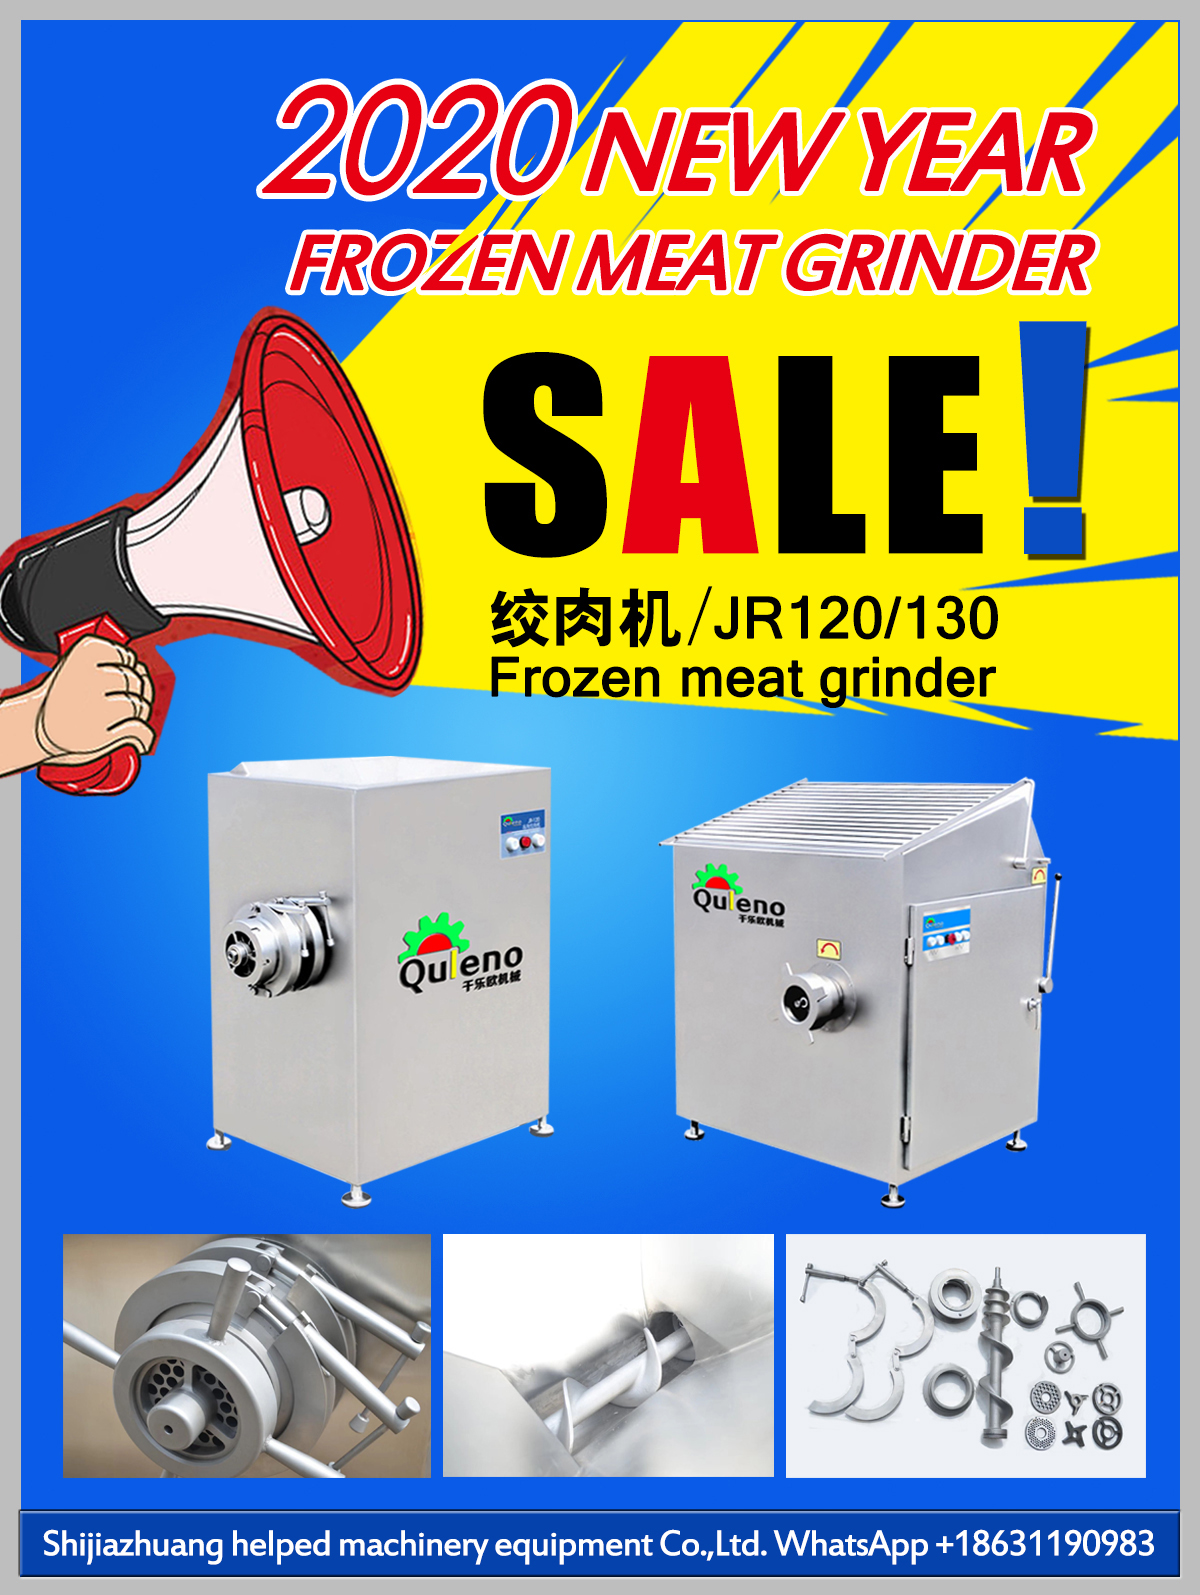 QULENO gas meat smoker BBQ GRILL FOR MEAT